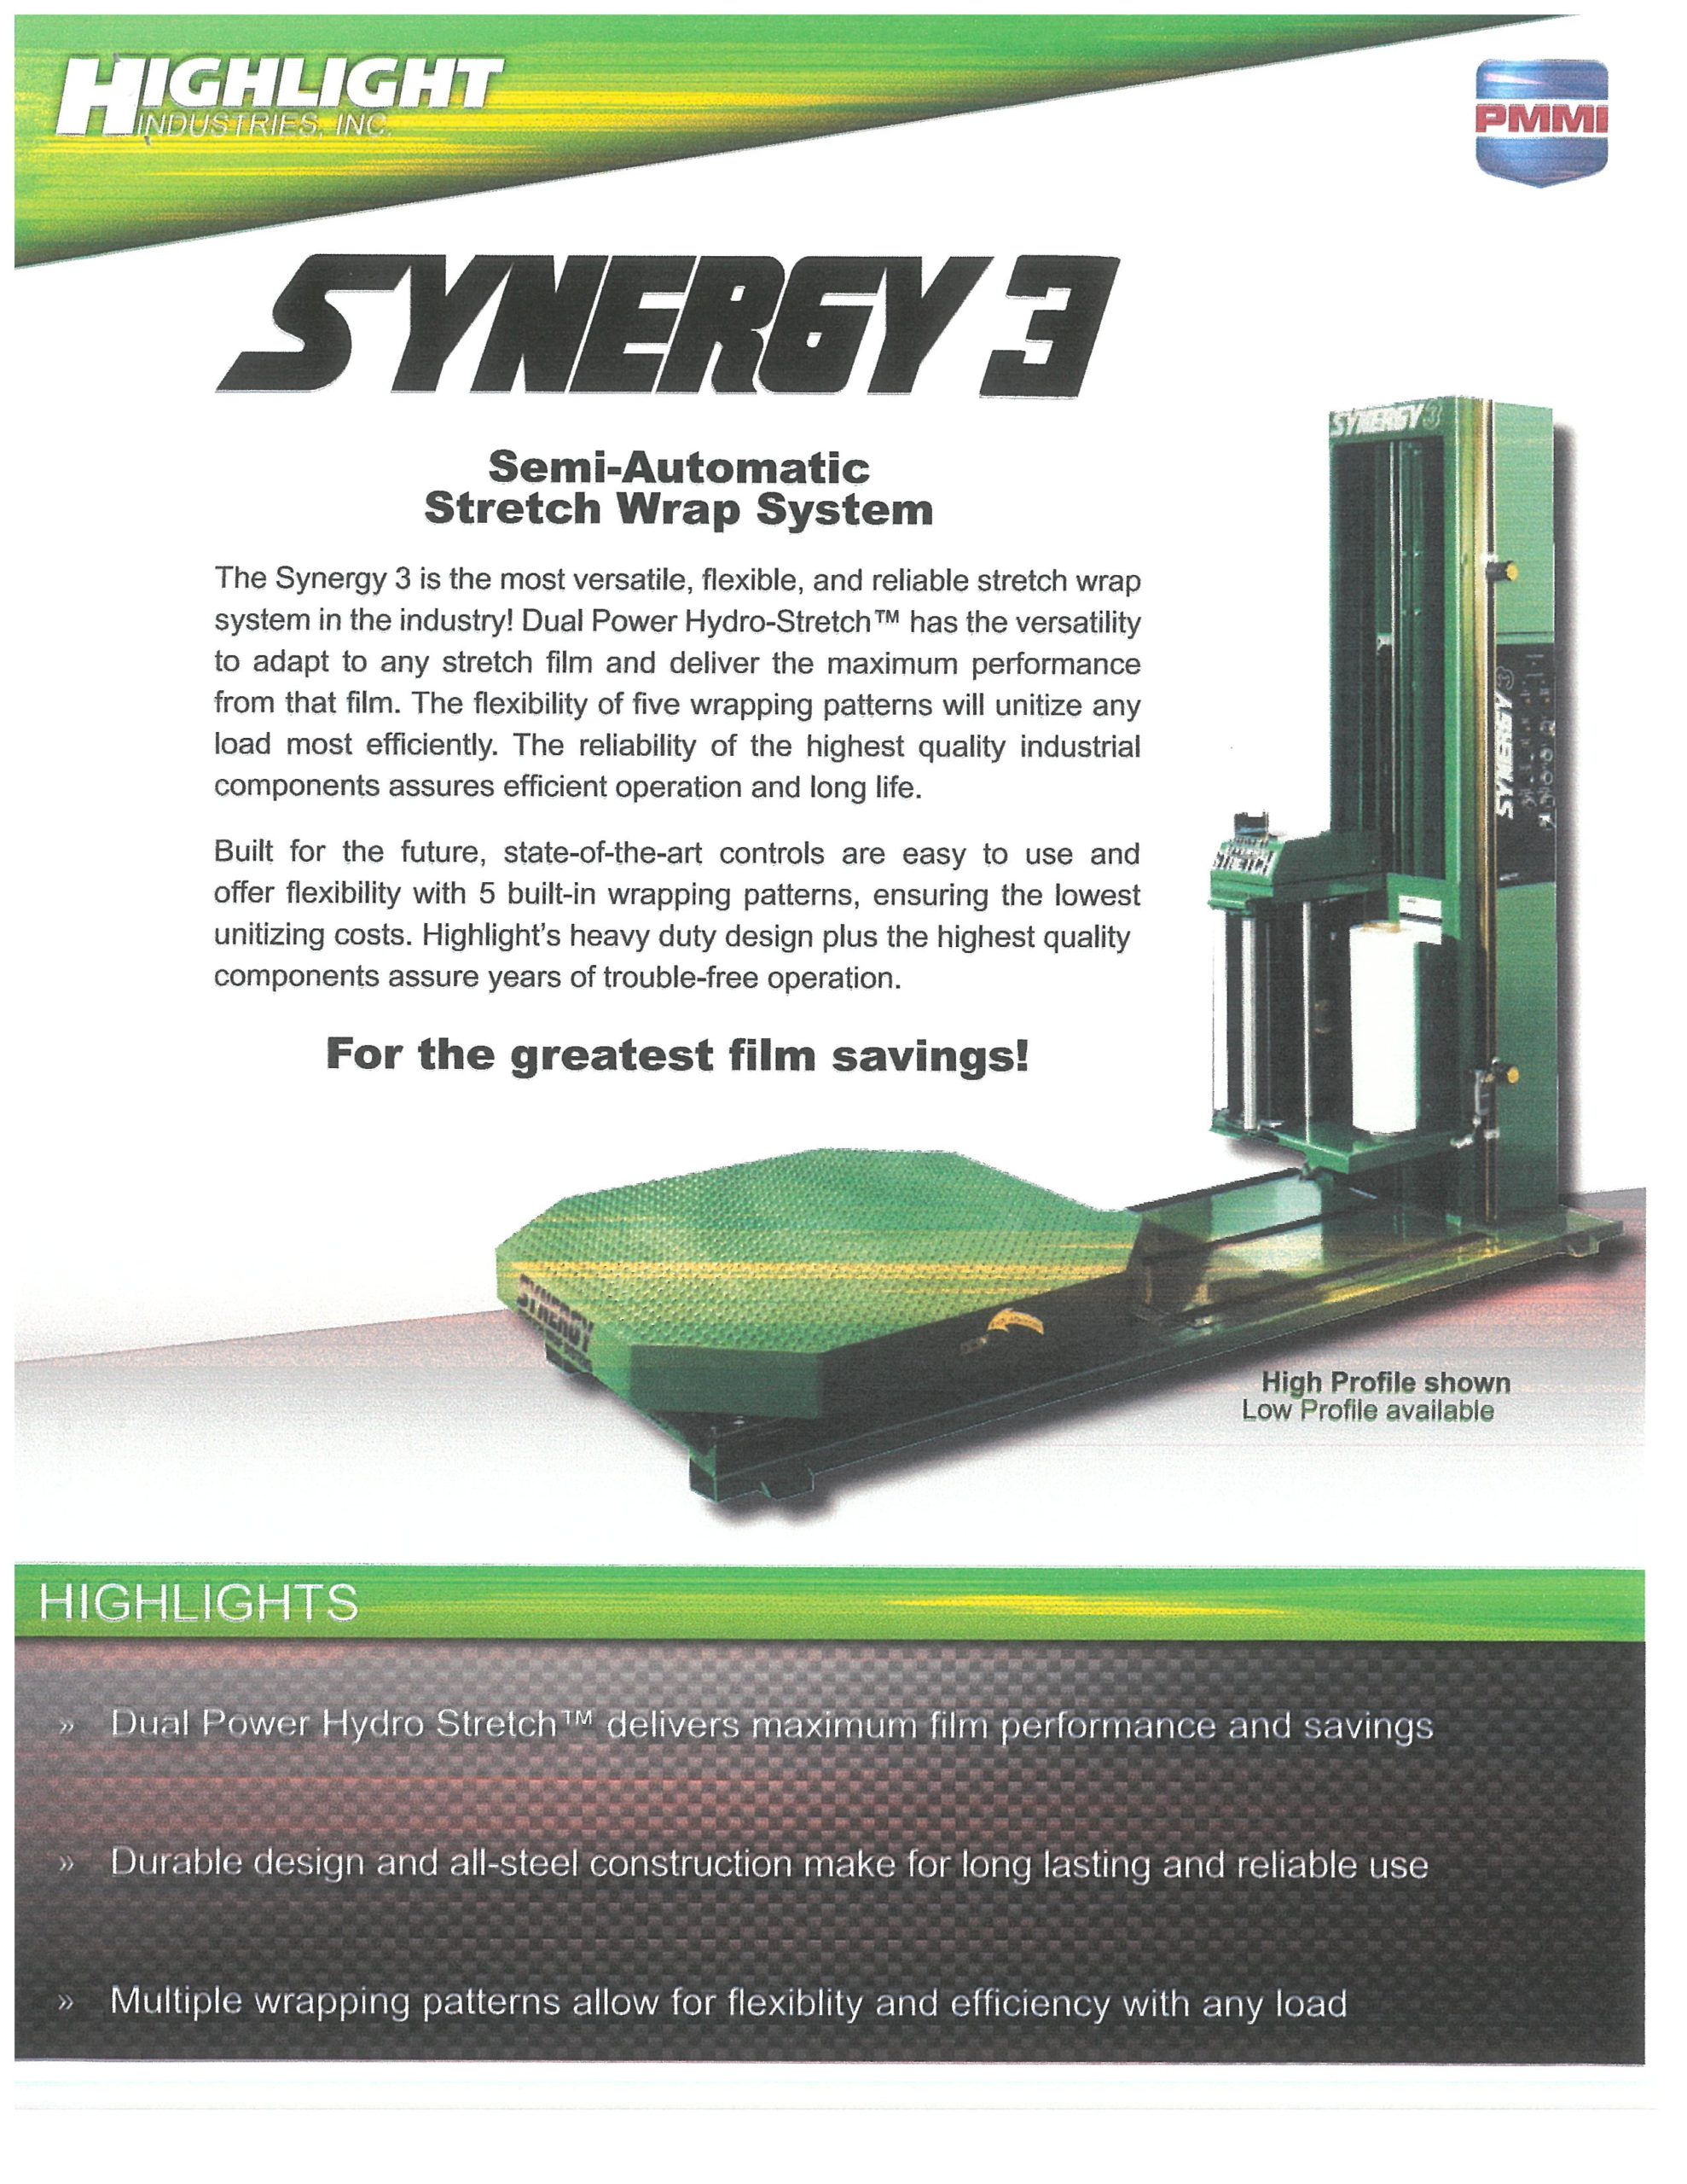 Used - Highlight Synergy 3 Semi-Automatic Stretch Wrapper MH2247-Material Handling